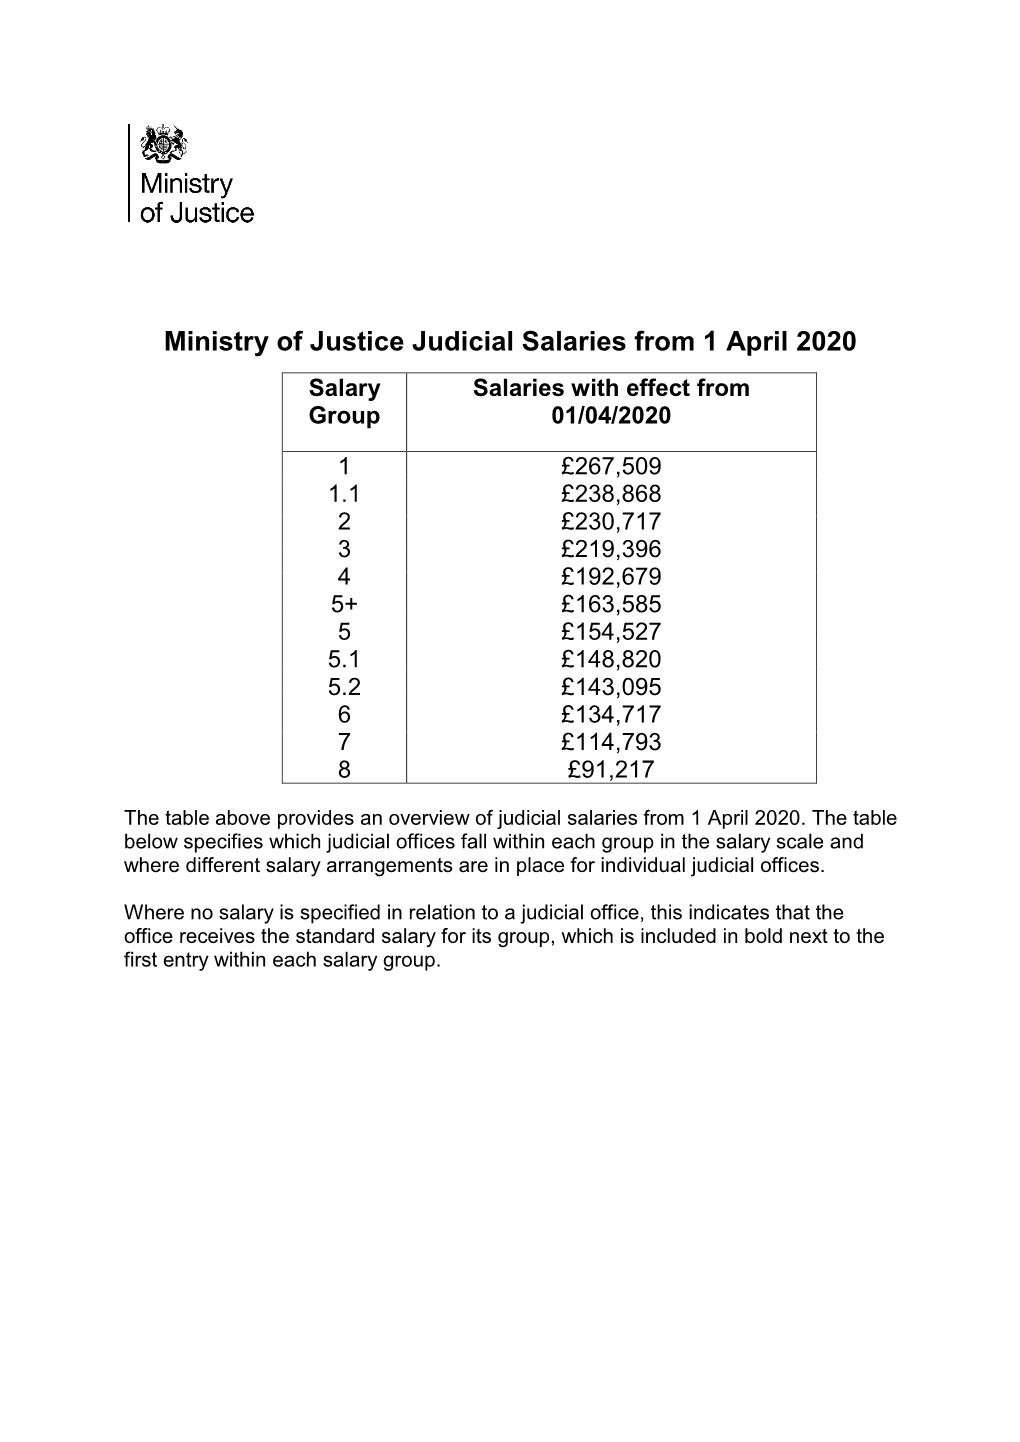 Ministry of Justice Judicial Salaries from 1 April 2020 Salary Salaries with Effect from Group 01/04/2020